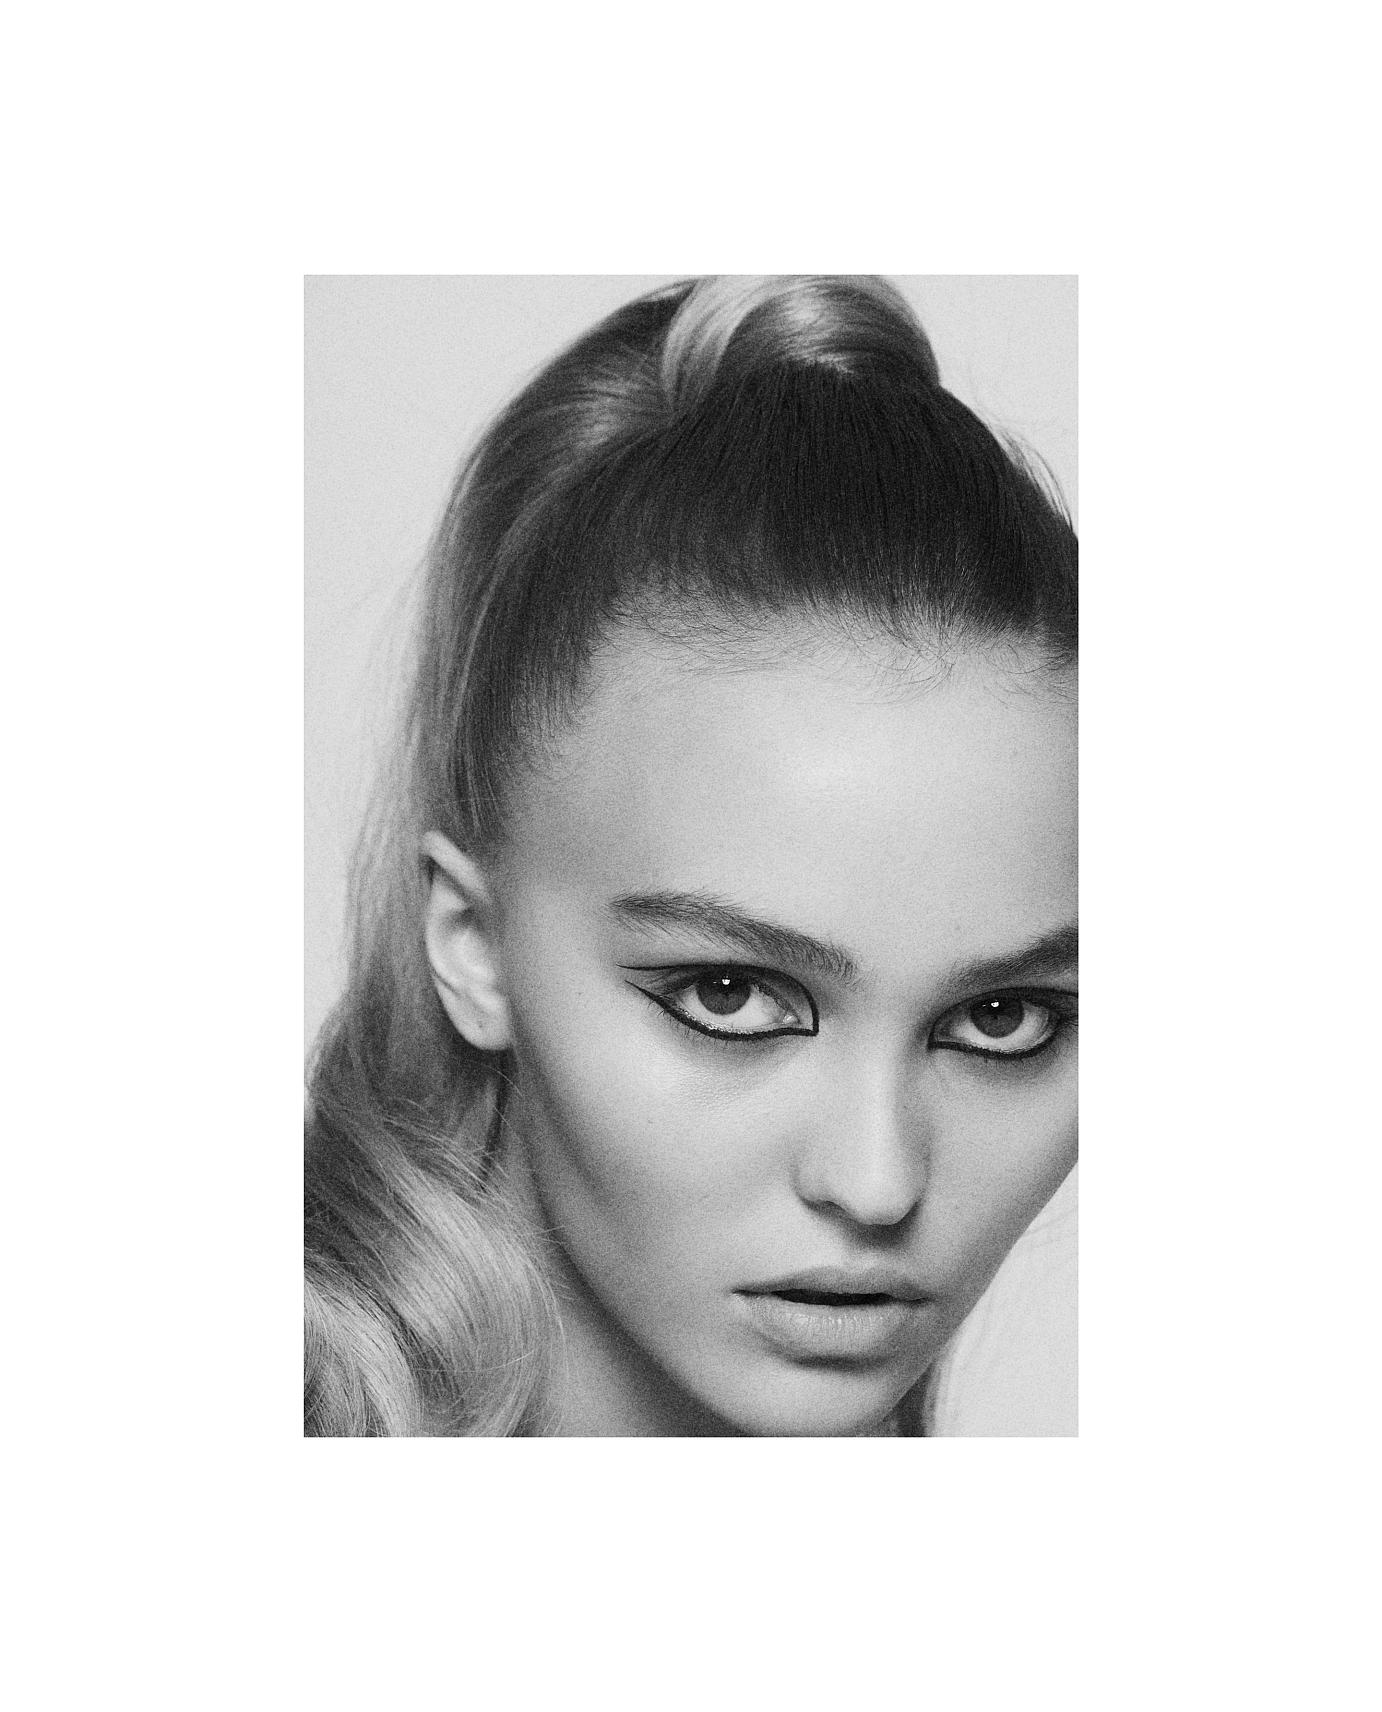 CoqCreative power by ProductionLink s.r.l. Glamour-Paris---Chanel-x-Lily-Rose-Depp Glamour-Paris---Chanel-x-Lily-Rose-Depp  Glamour-Paris---Chanel-x-Lily-Rose-Depp